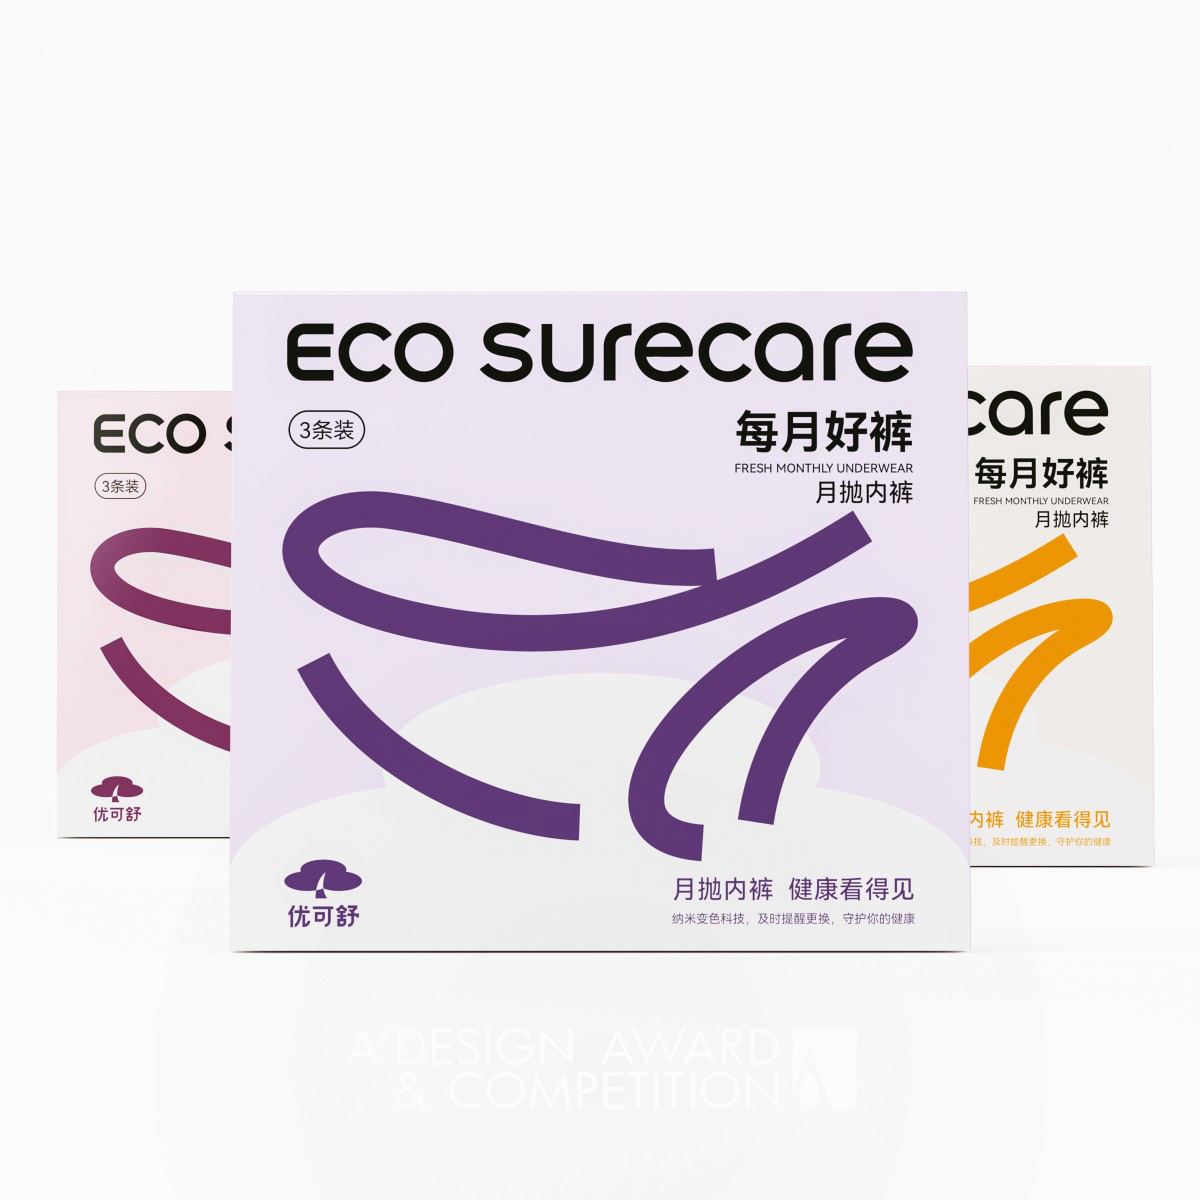 Shen Duan wins Iron at the prestigious A' Packaging Design Award with Eco Surecare Underwear Packaging.